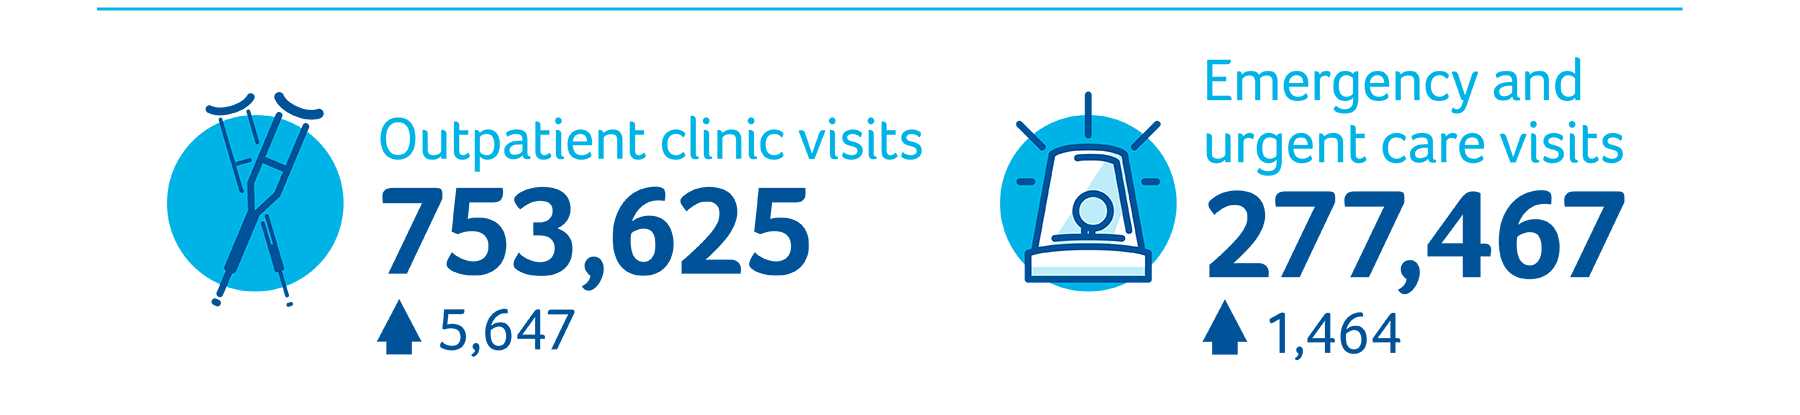 753,625 Outpatient Clinic Visits (5,647 more than last year). 277,467 Emergency and urgent care visits (1,464 more than last year)